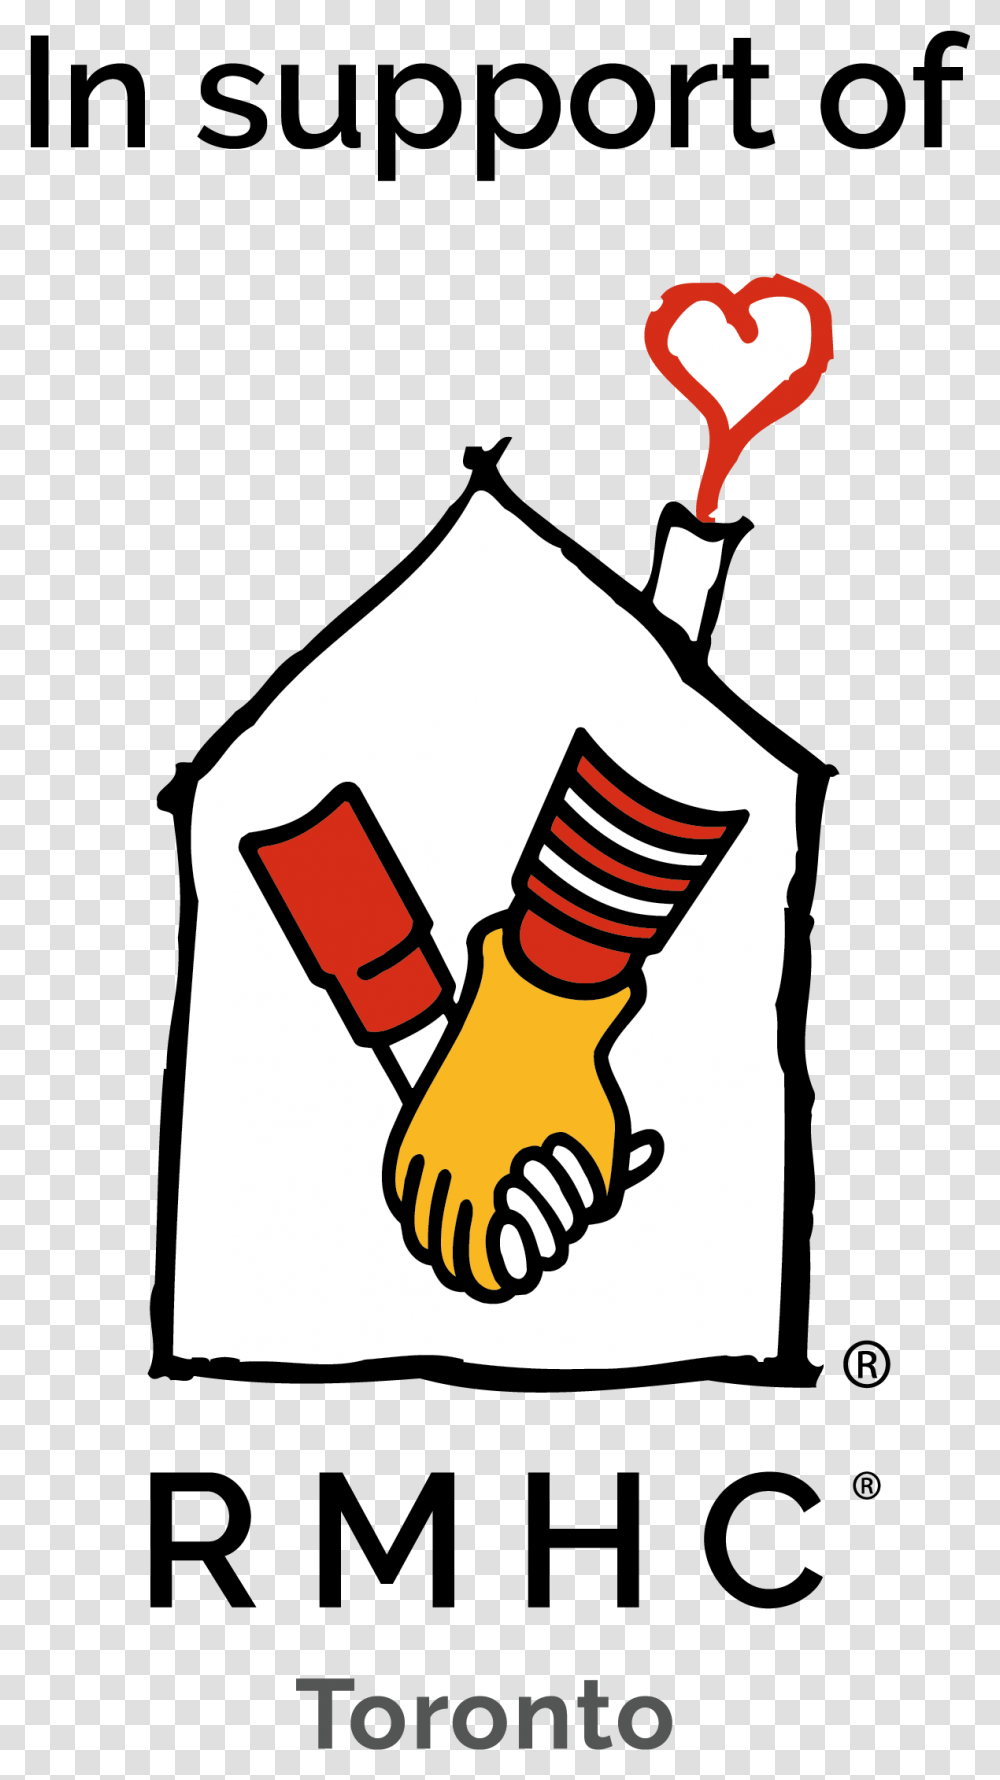 Ronald Mcdonald House Ronald Mcdonald House Charity Logo, Hand, Holding Hands, Weapon, Weaponry Transparent Png